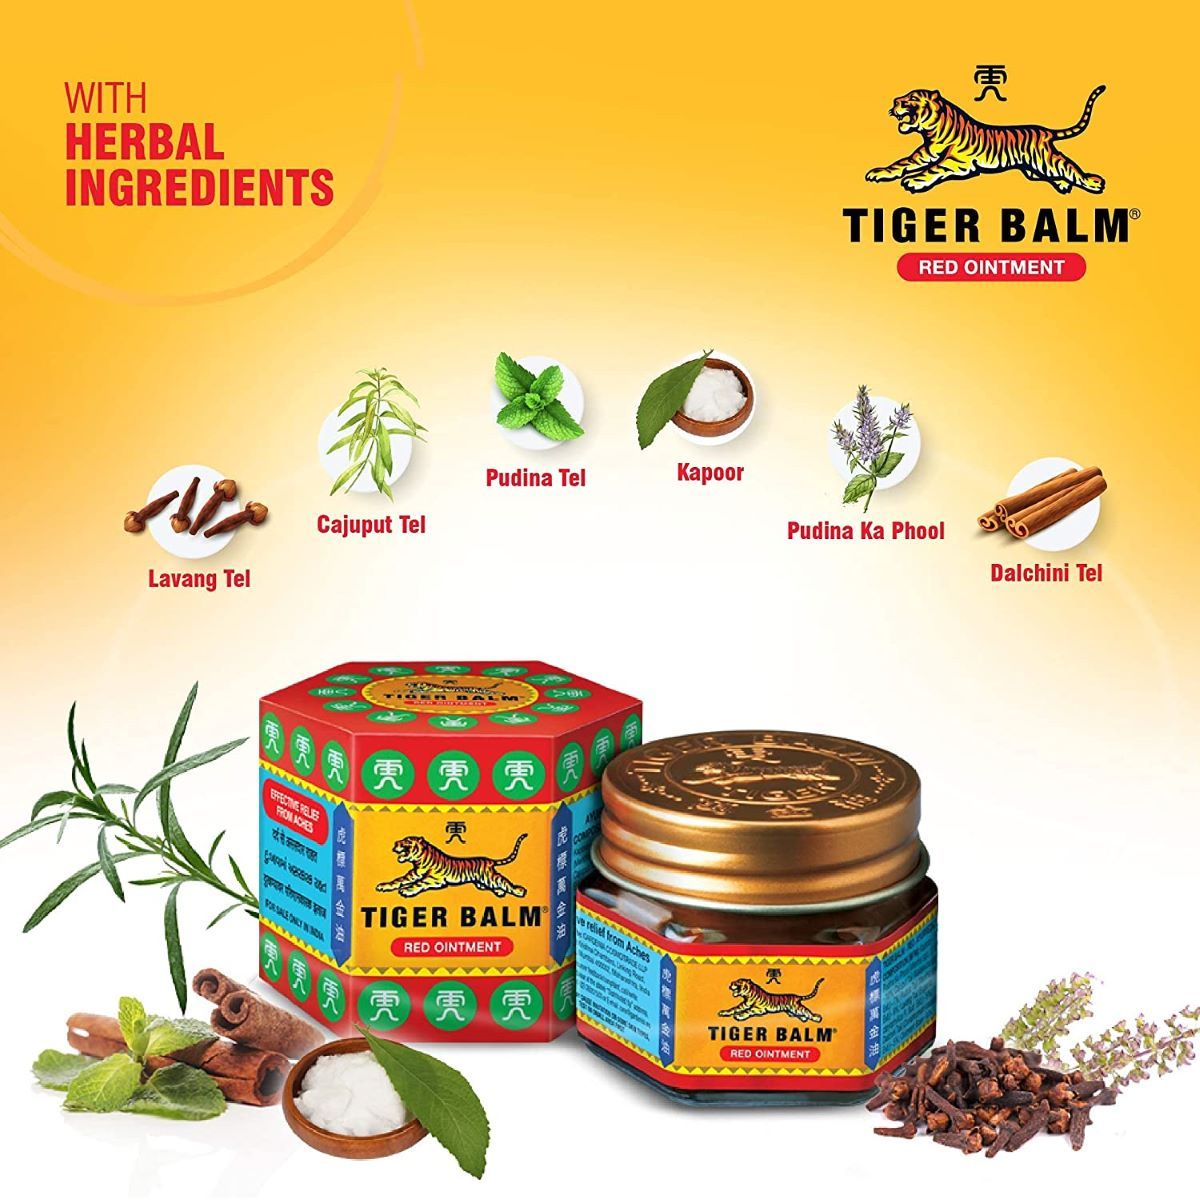 Tiger Balm Red Ointment, 8 gm Price, Uses, Side Effects, Composition - Apollo Pharmacy